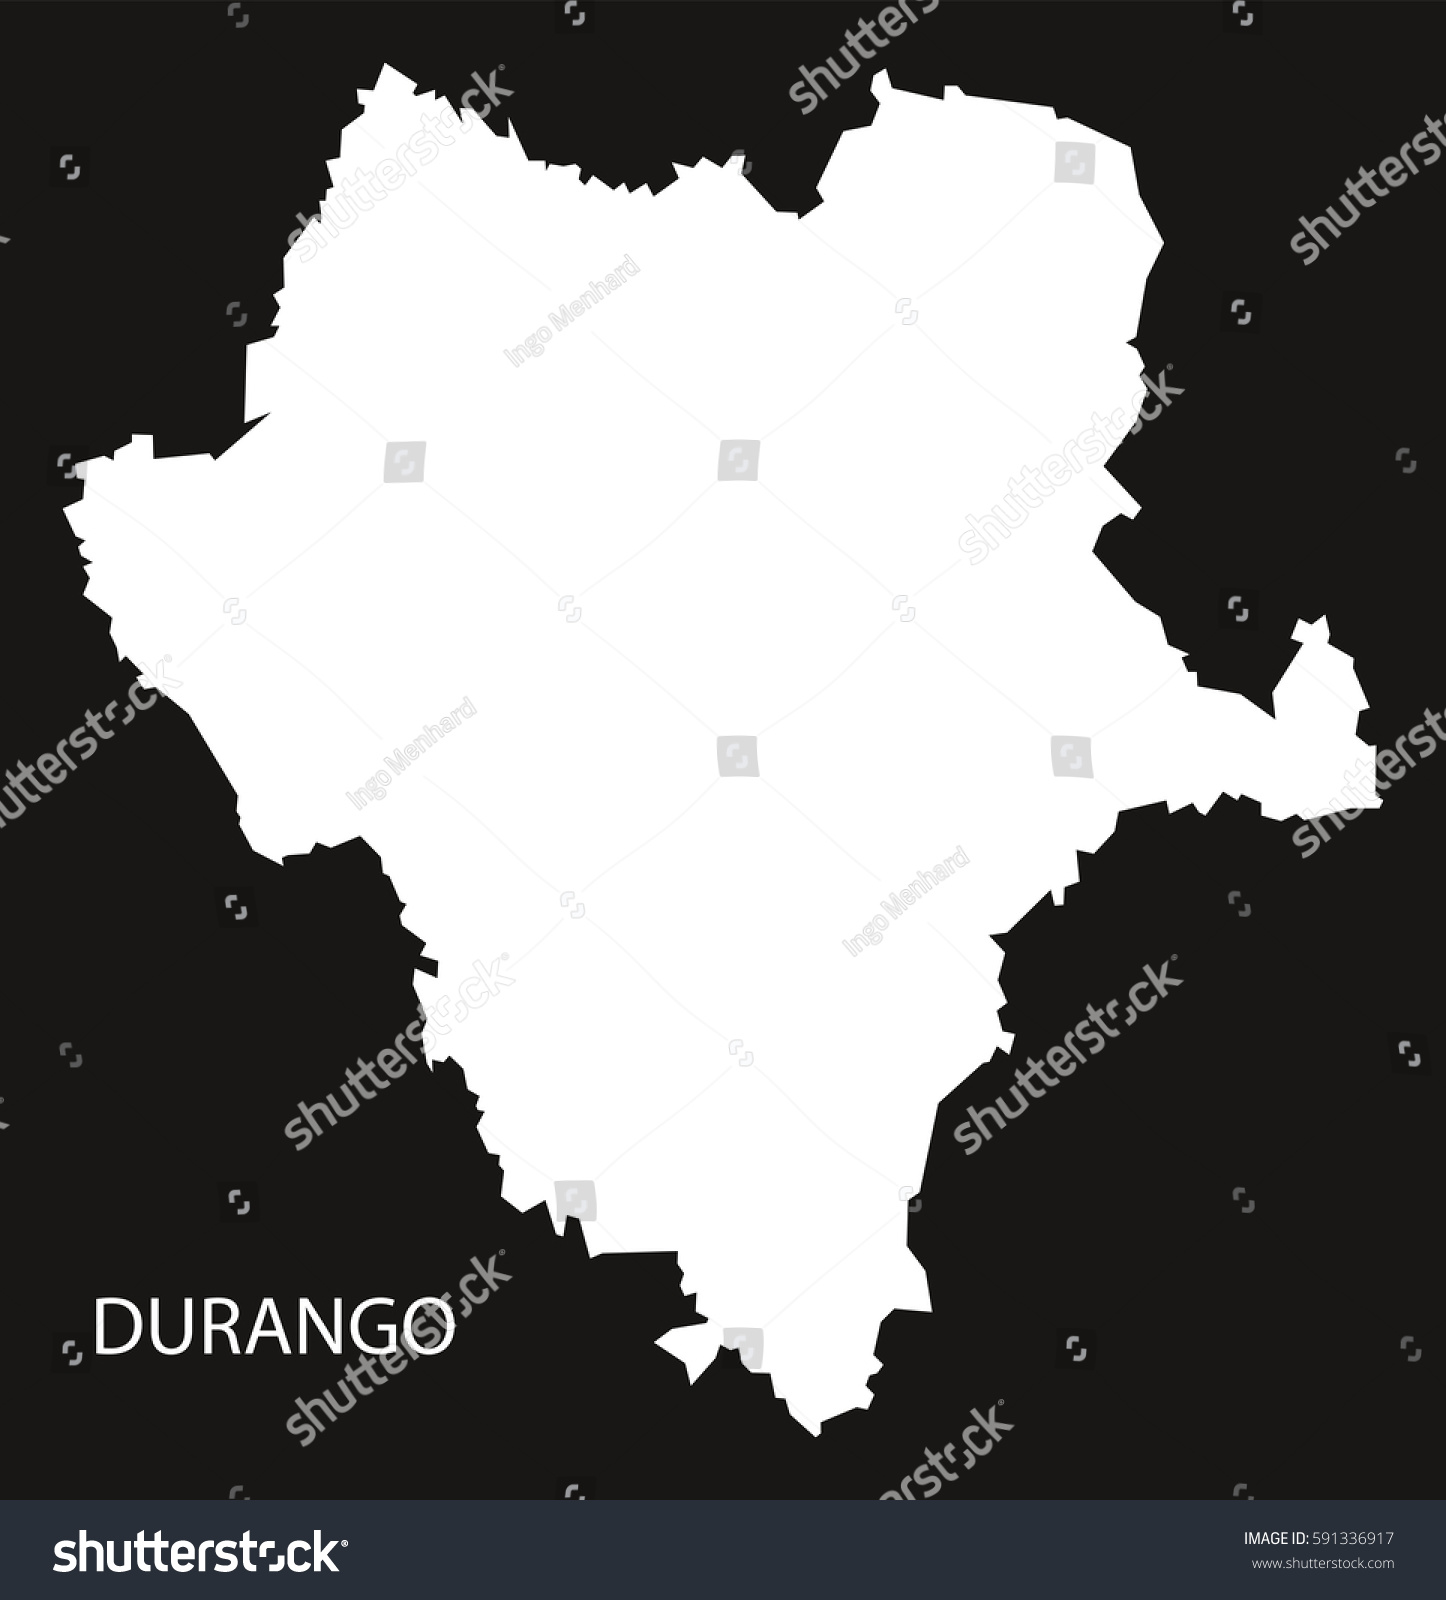 Durango Mexico Map Black Inverted Silhouette Royalty Free Stock Vector 591336917 3390